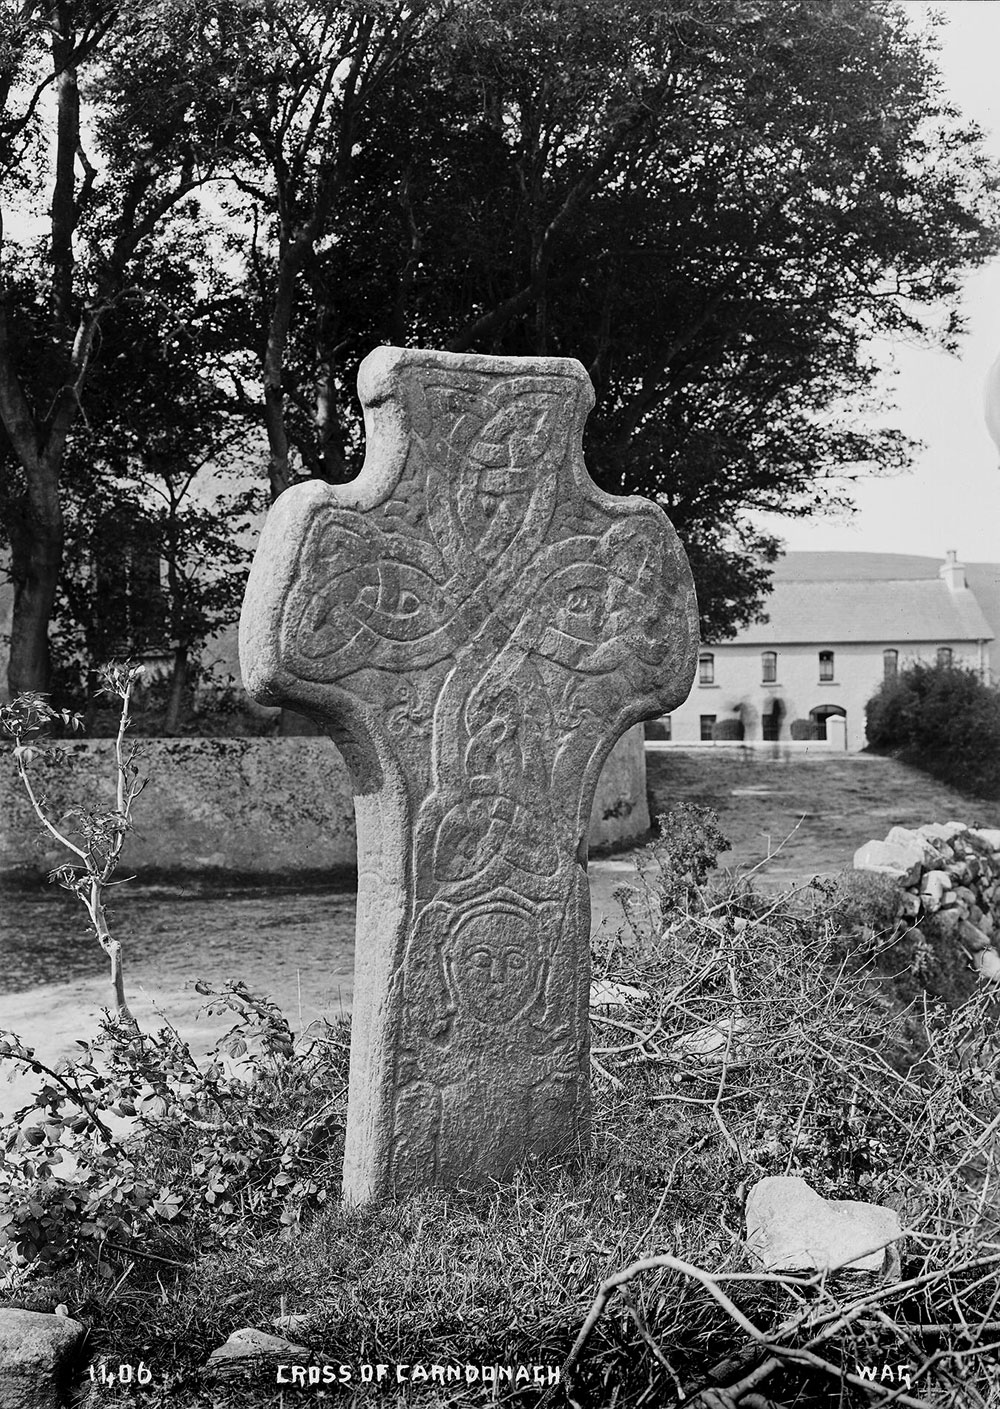 The Carndonagh cross by W. A. Green.